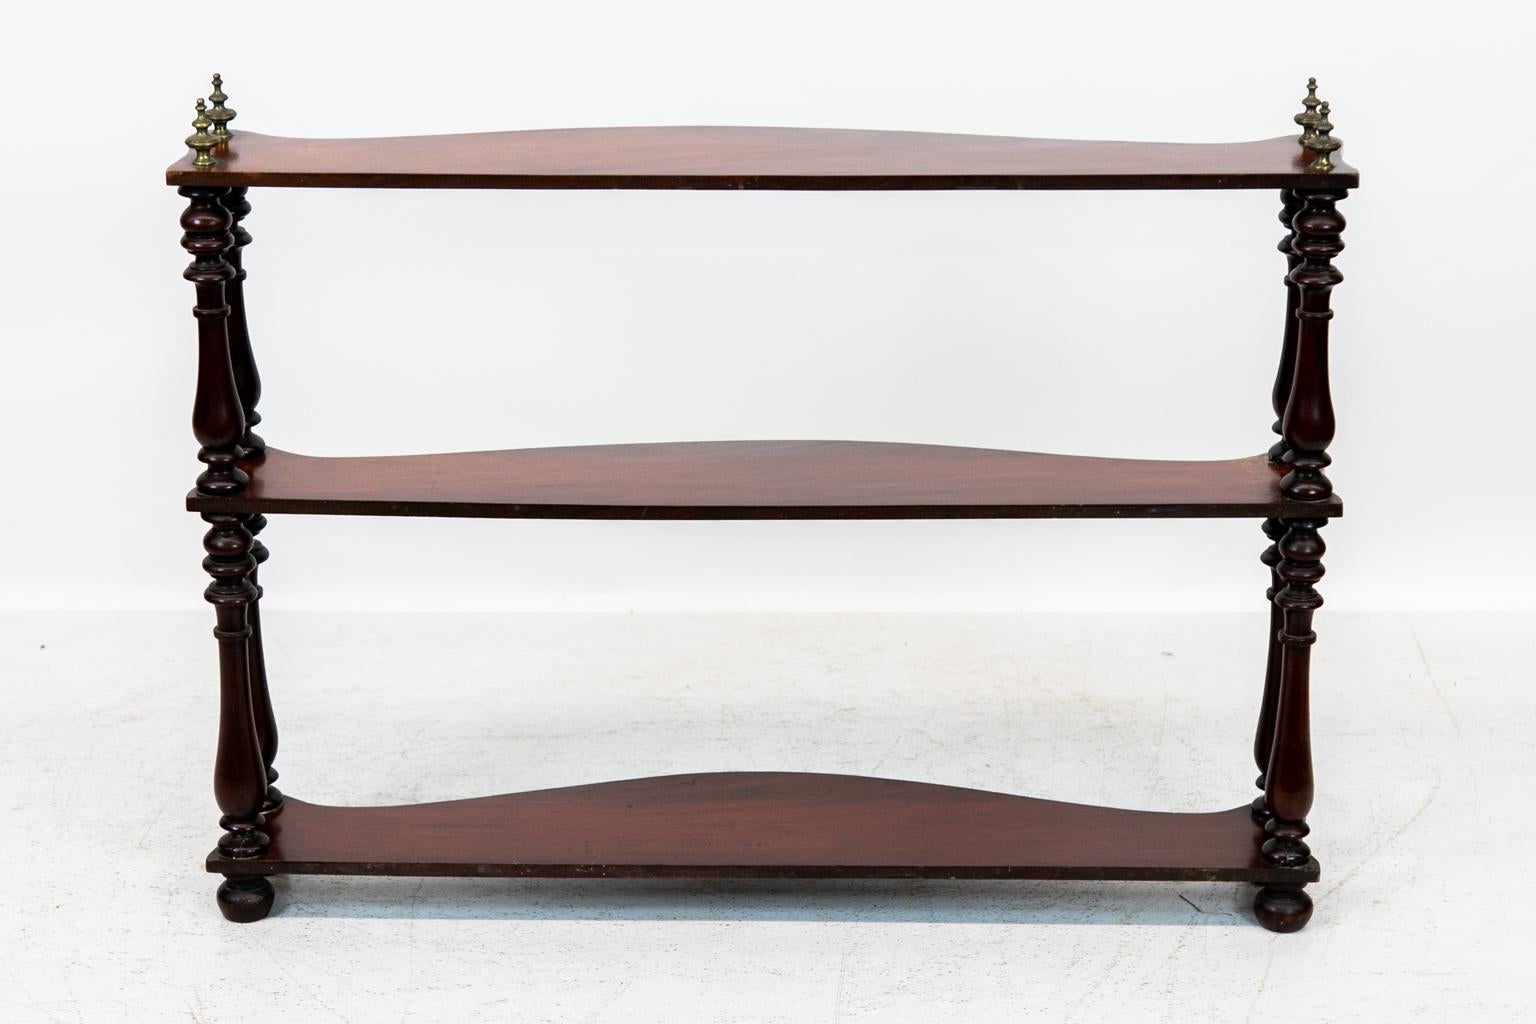 Mahogany serpentine three-tier shelf, has four brass finials and is supported on bun feet. It is designed for hanging or counter top use.
  